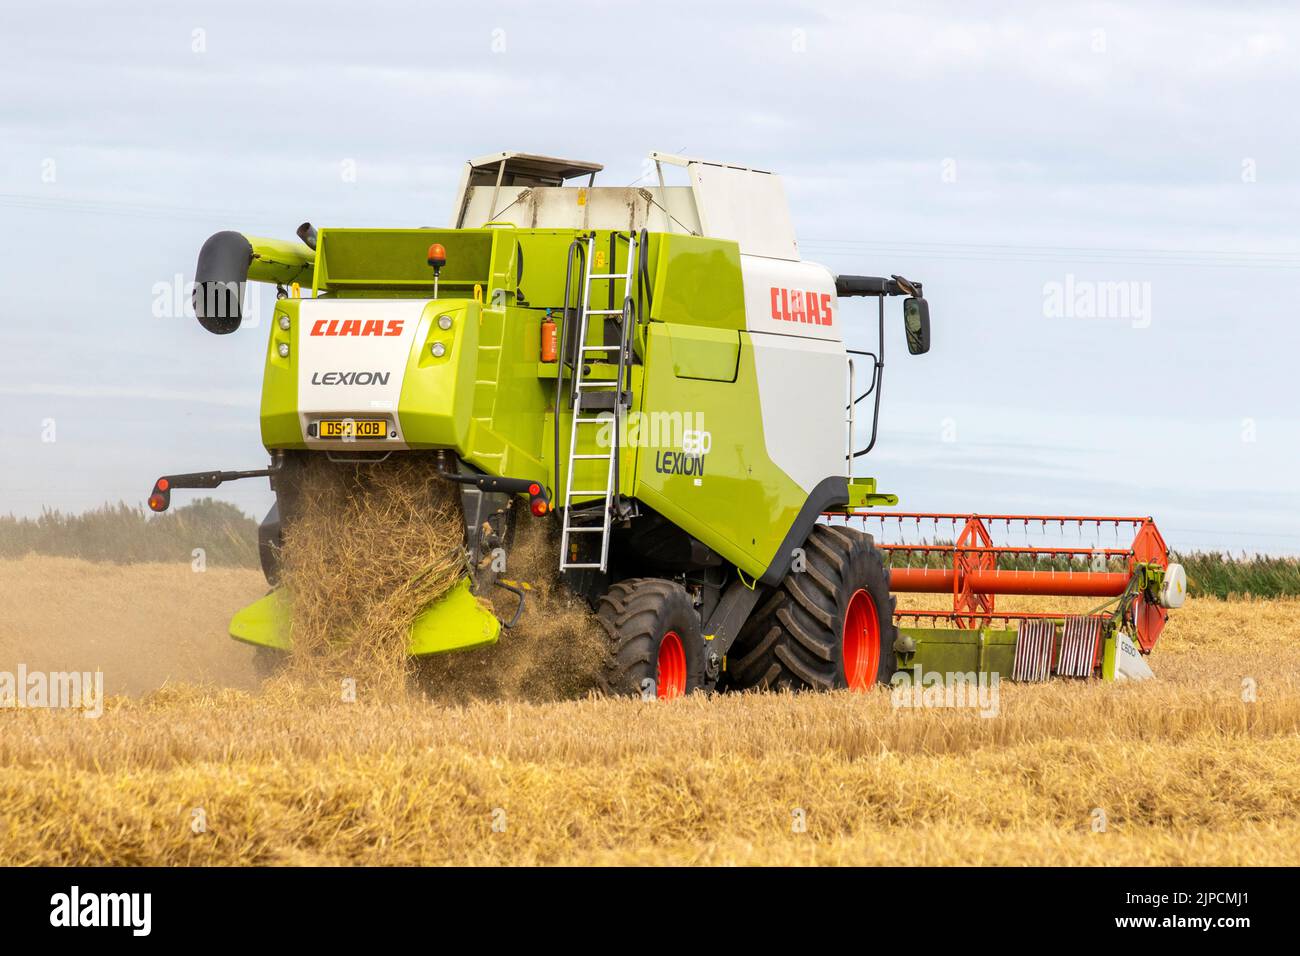 Claas Lexion 8900 The world's biggest harvester in Tarleton, Lancashire.  UK Weather. August 2022. Claus Combine Harvester contractor in demand in rural Lancashire as rain is forecast within the next 24 hours.  It takes around 2 months for barley to grow large enough to harvest and have the largest yield of grains. When the stalks turn completely golden yellow, the moisture levels in the barley are lower and they are easier to cut down.  There is an old adage when growing barley.  'When it looks ready to harvest - wait a month.' Stock Photo